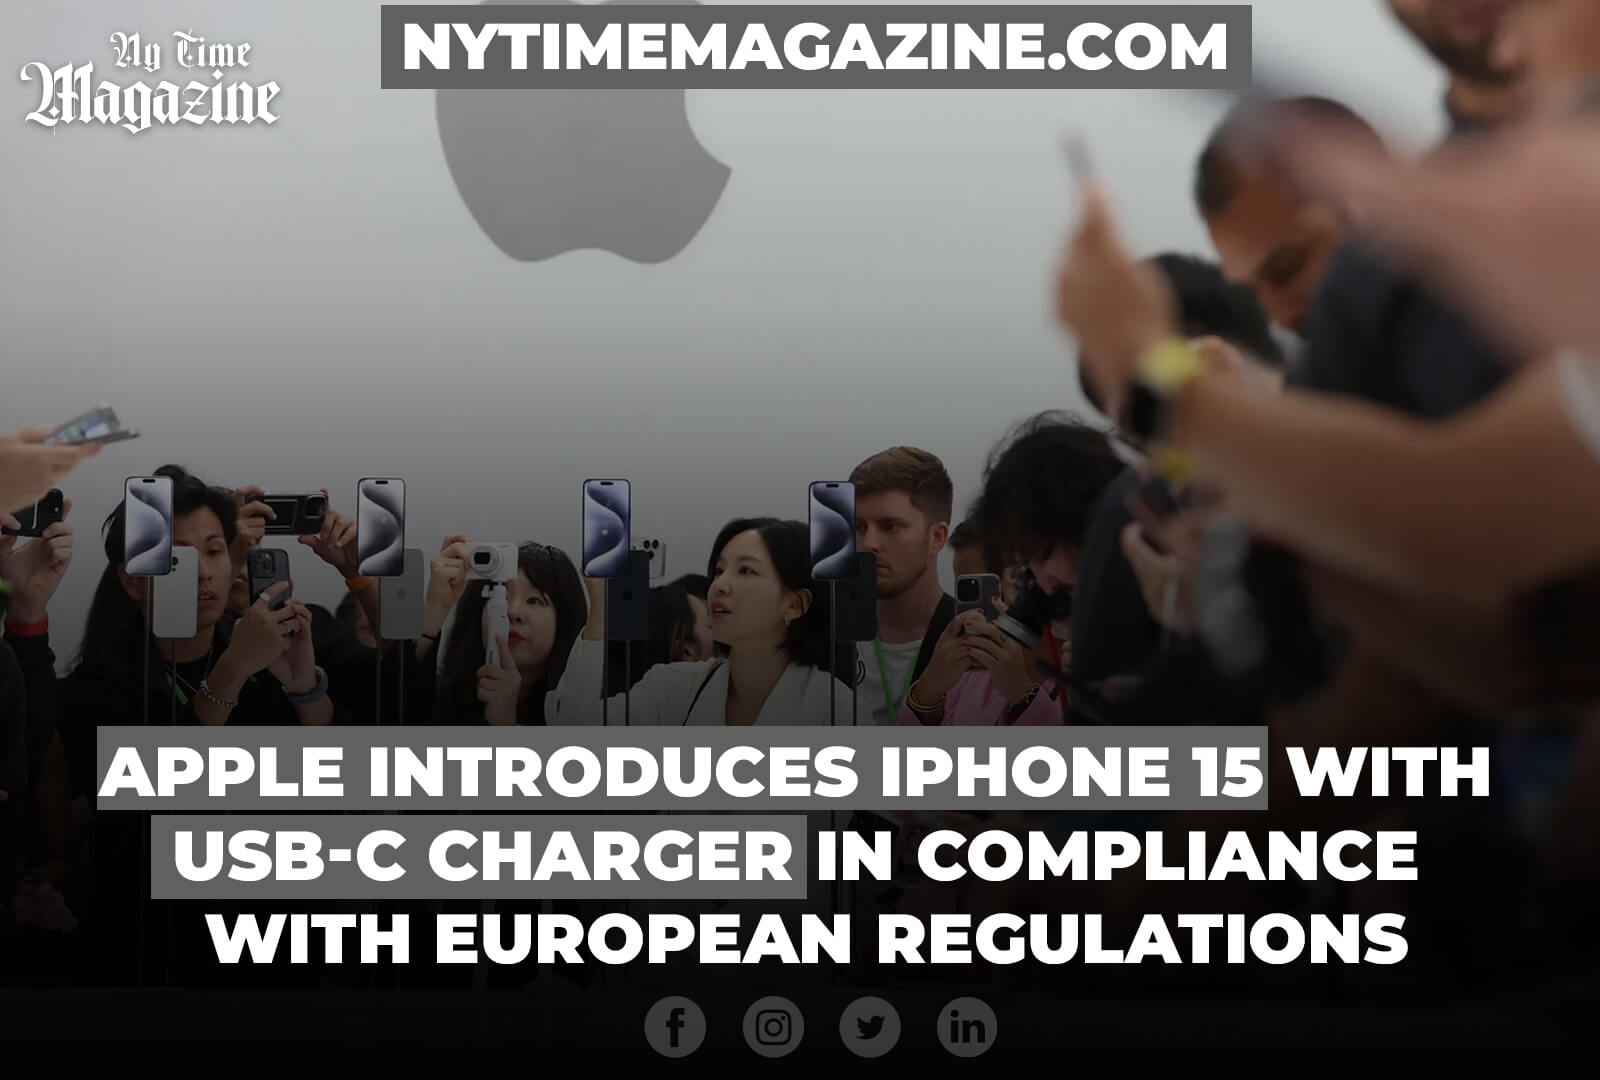 APPLE INTRODUCES IPHONE 15 WITH USB-C CHARGER IN COMPLIANCE WITH EUROPEAN REGULATIONS